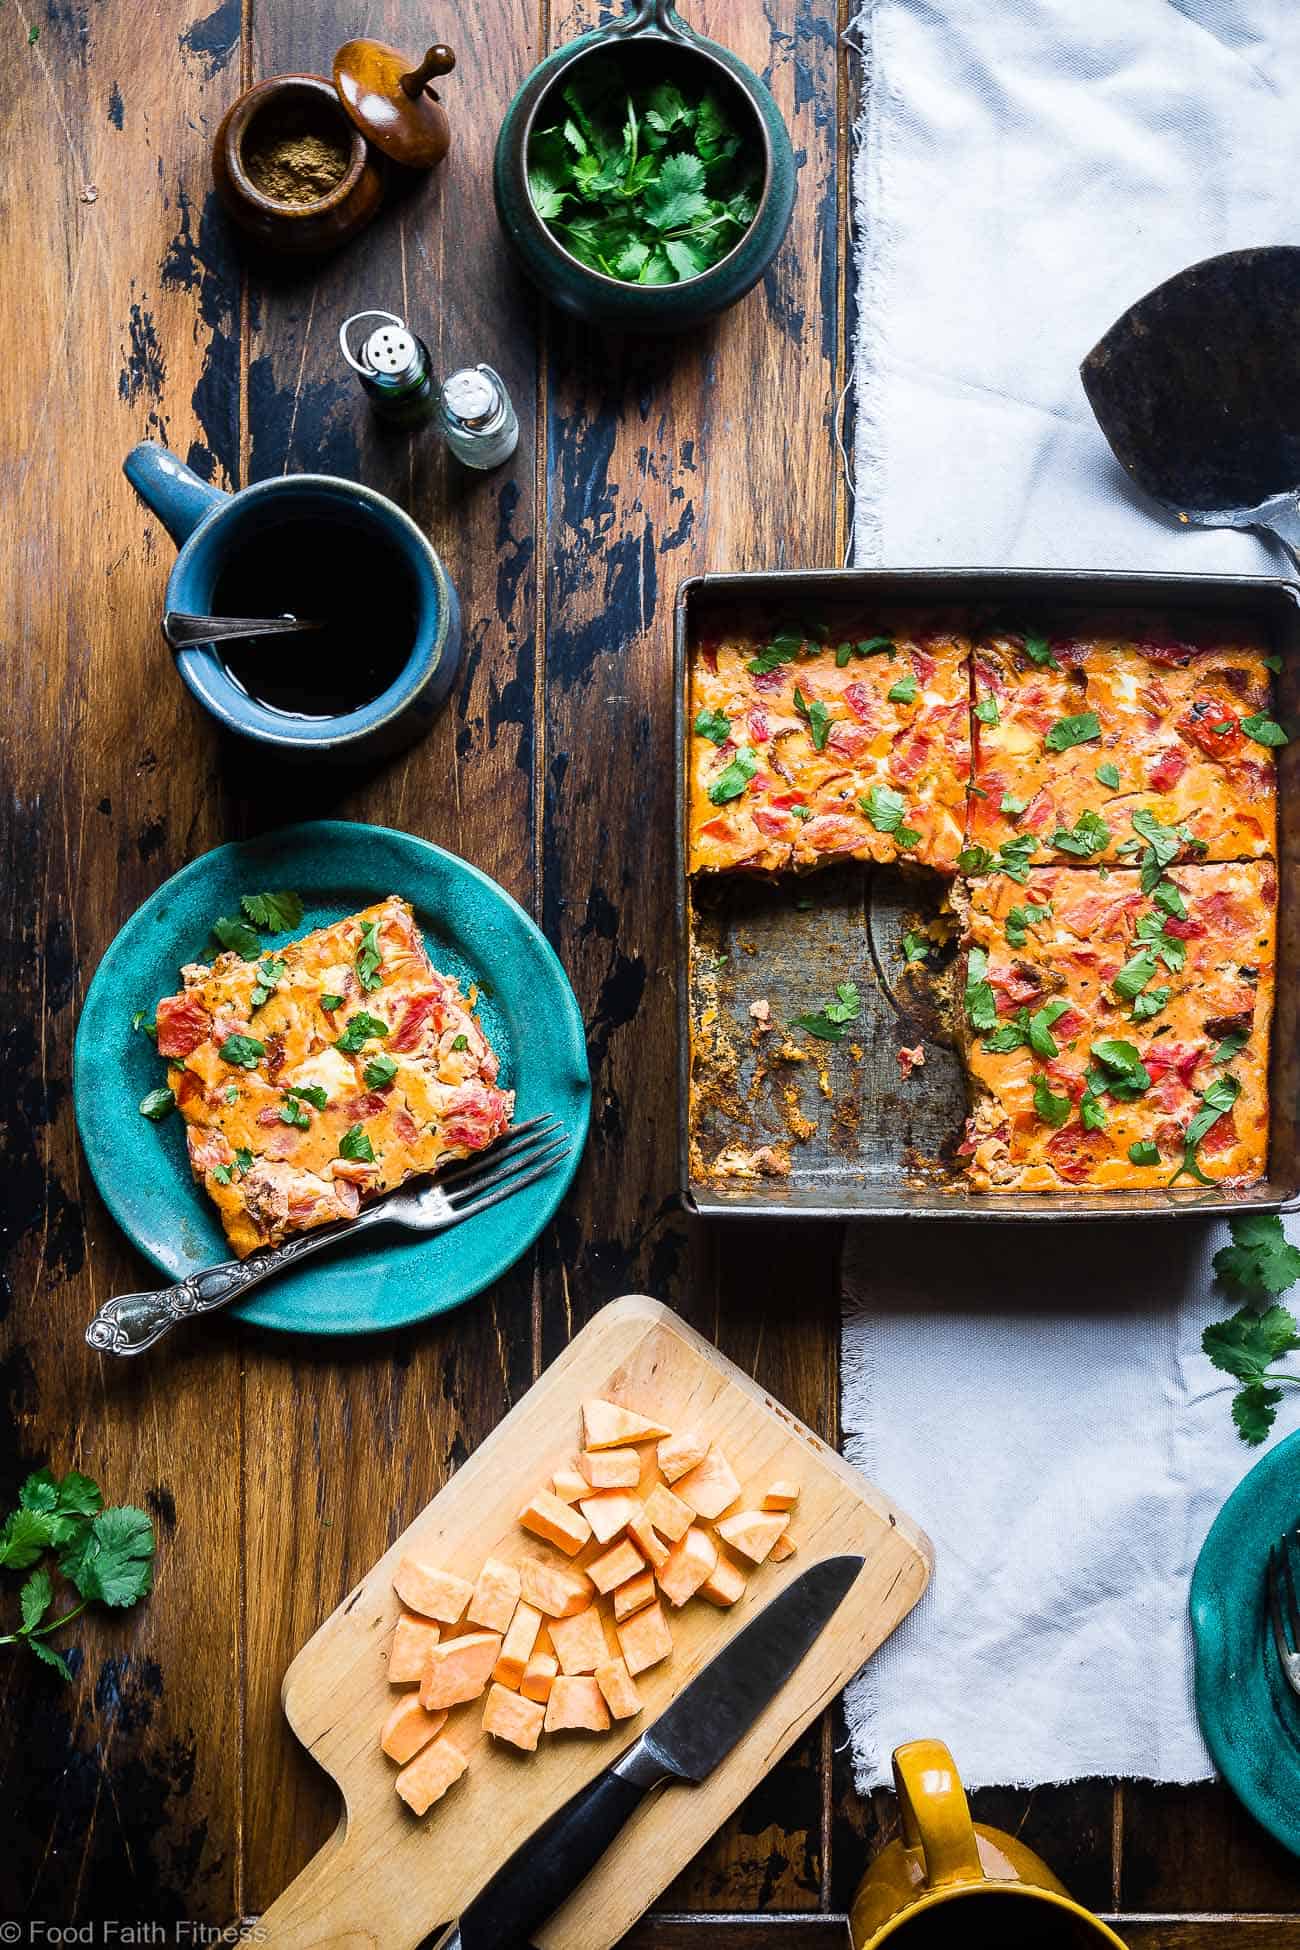 Healthy Gluten Free Paleo Egg Casserole - This healthy, gluten free,  paleo breakfast casserole is an easy breakfast or brunch with a little taste of the Middle East!  Grain/dairy/sugar free and only 200 calories a serving! | #Foodfaithfitness | #whole30 #paleo #glutenfree #healthy #breakfast